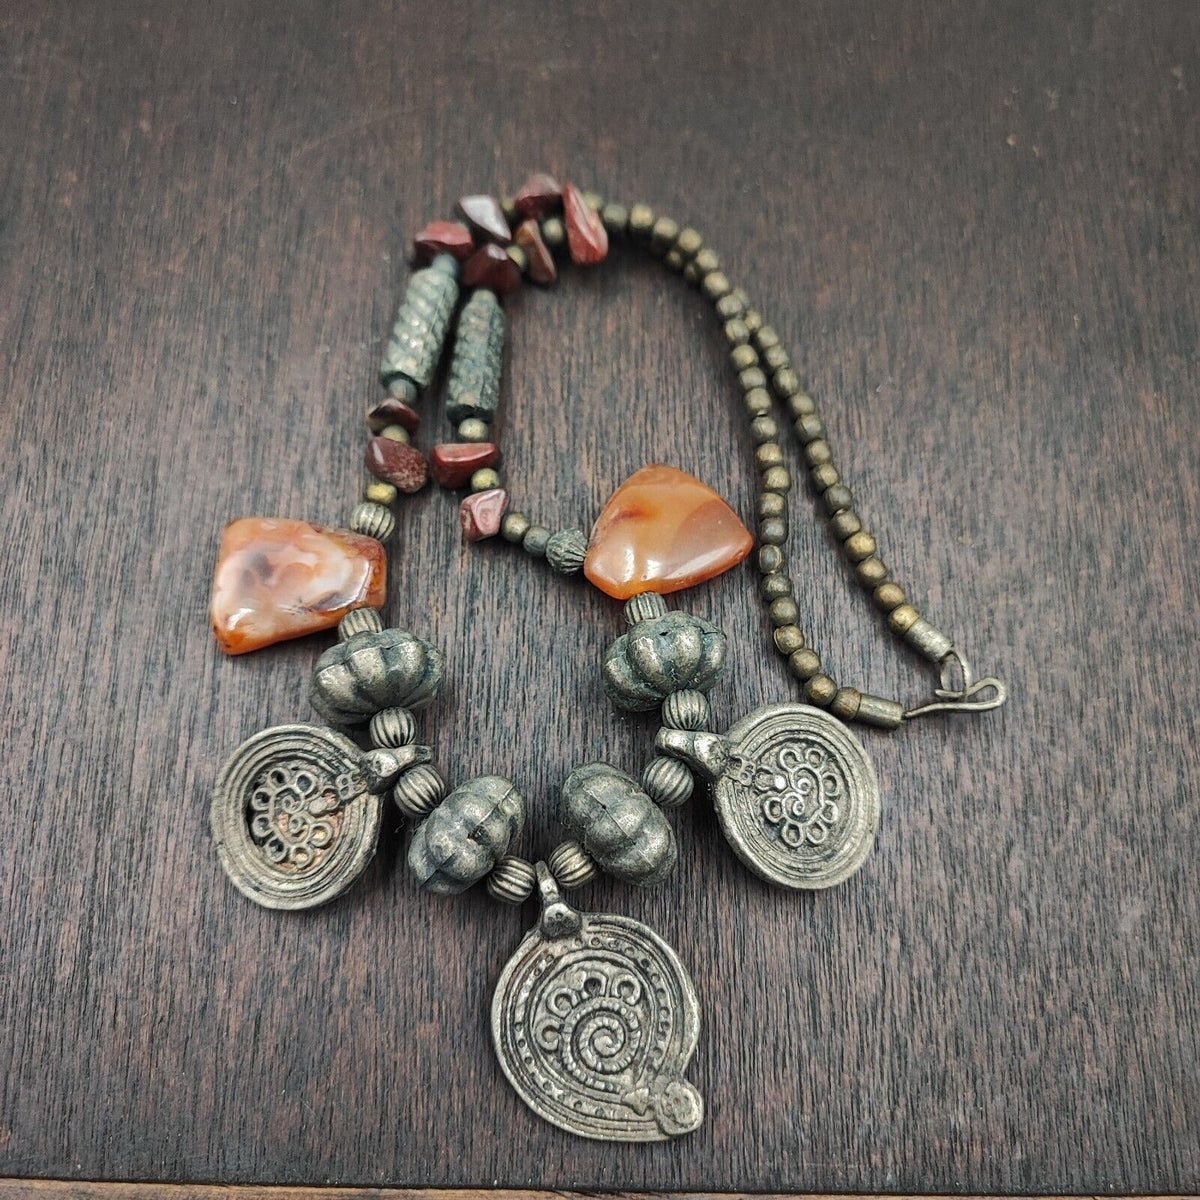 Beautiful Rusted Tibetan Silver Nepalese Stone Antique Jewelry Necklace N45